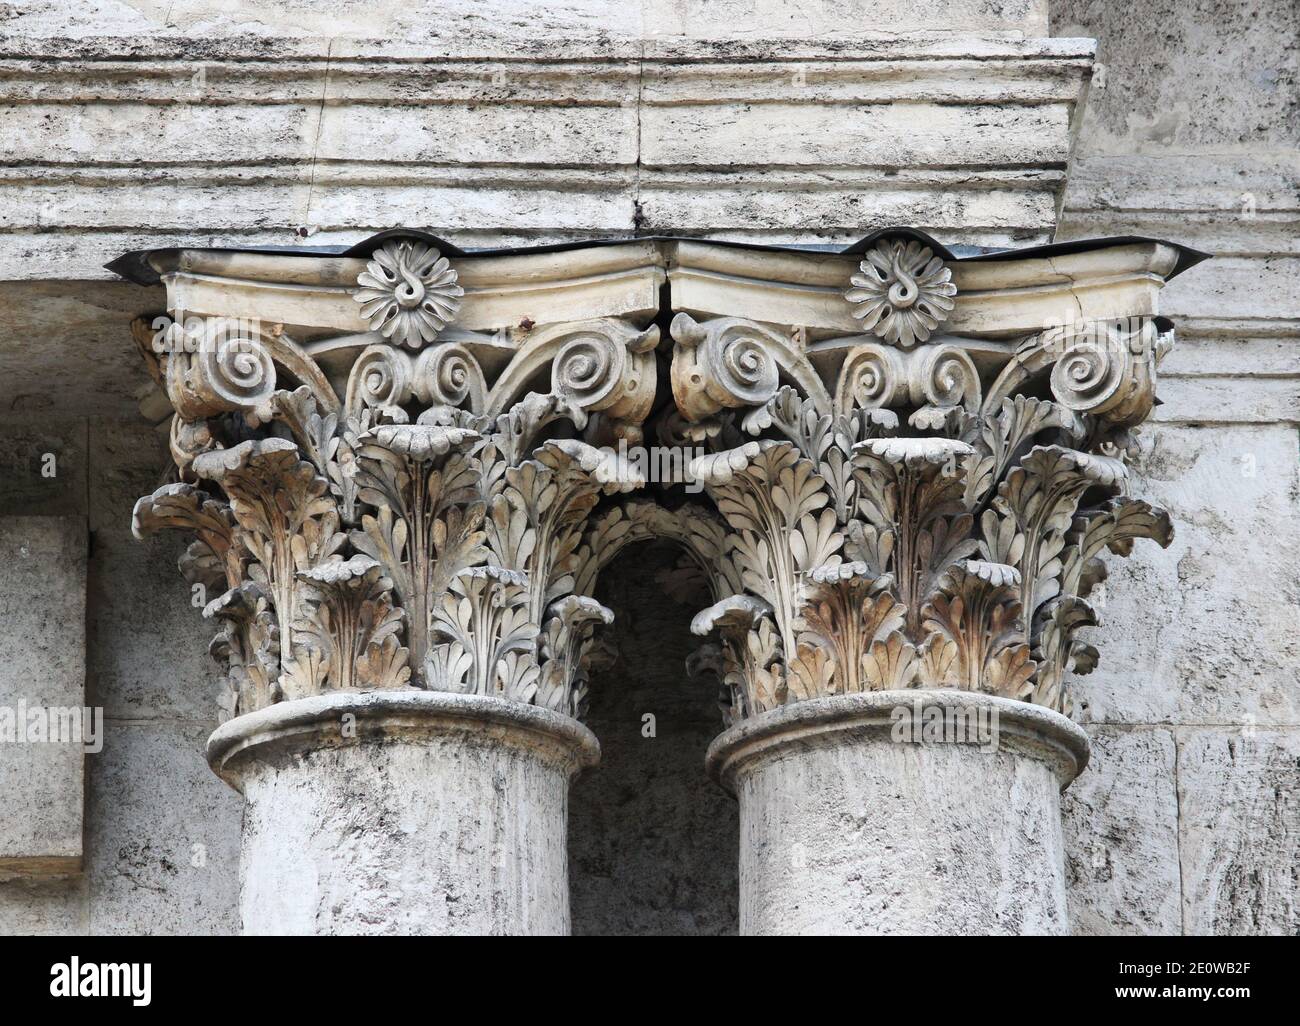 old baroque columns on a historic building that is in disrepair. Russia. elements of architectural decorations of buildings, columns Stock Photo